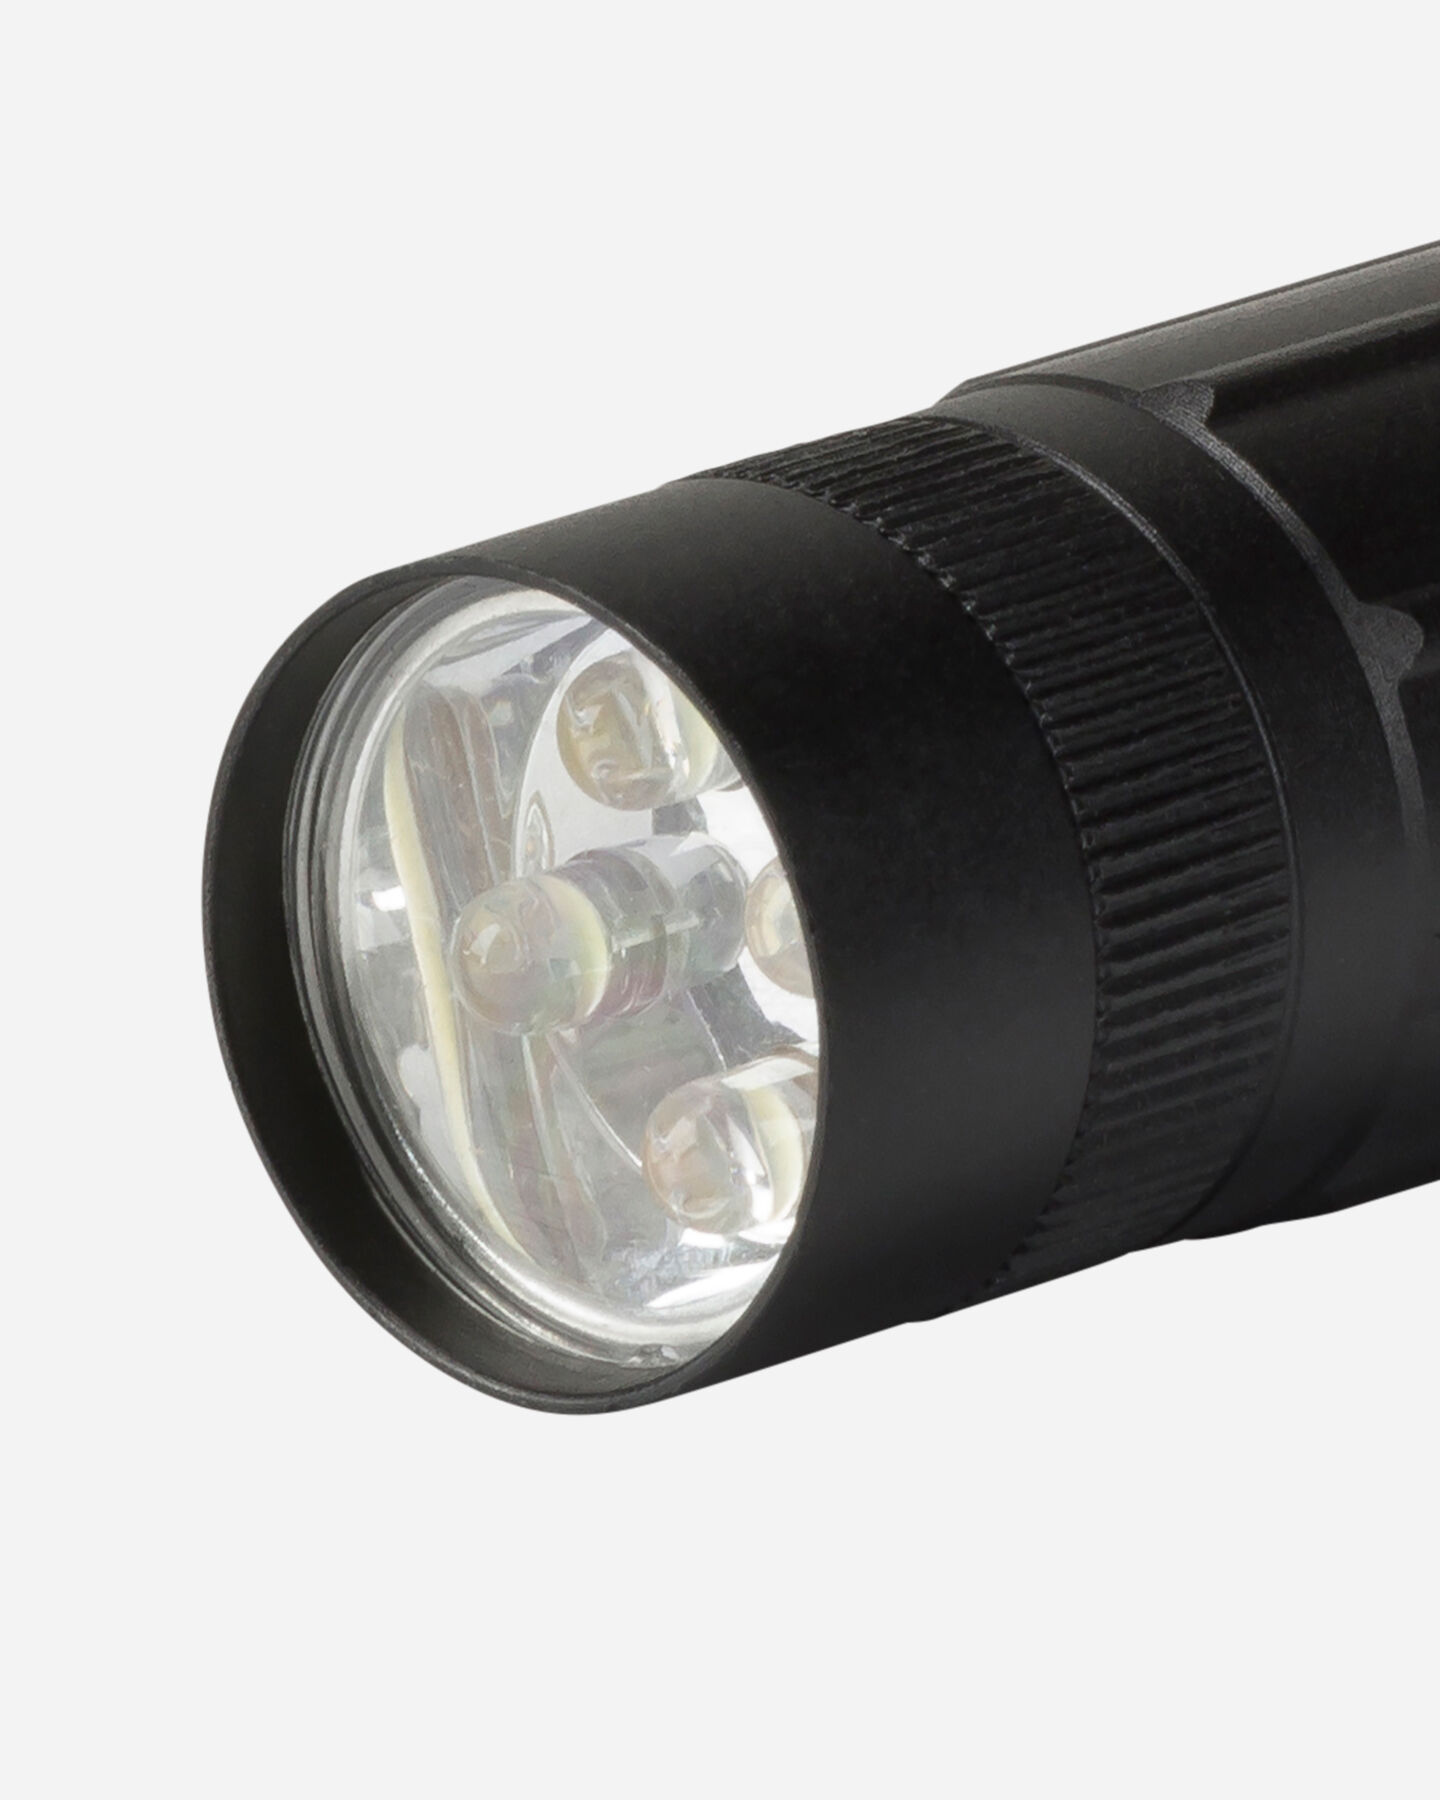  Luce camping MCKINLEY ALU FLASHLIGHT LED S2000778|050|- scatto 1